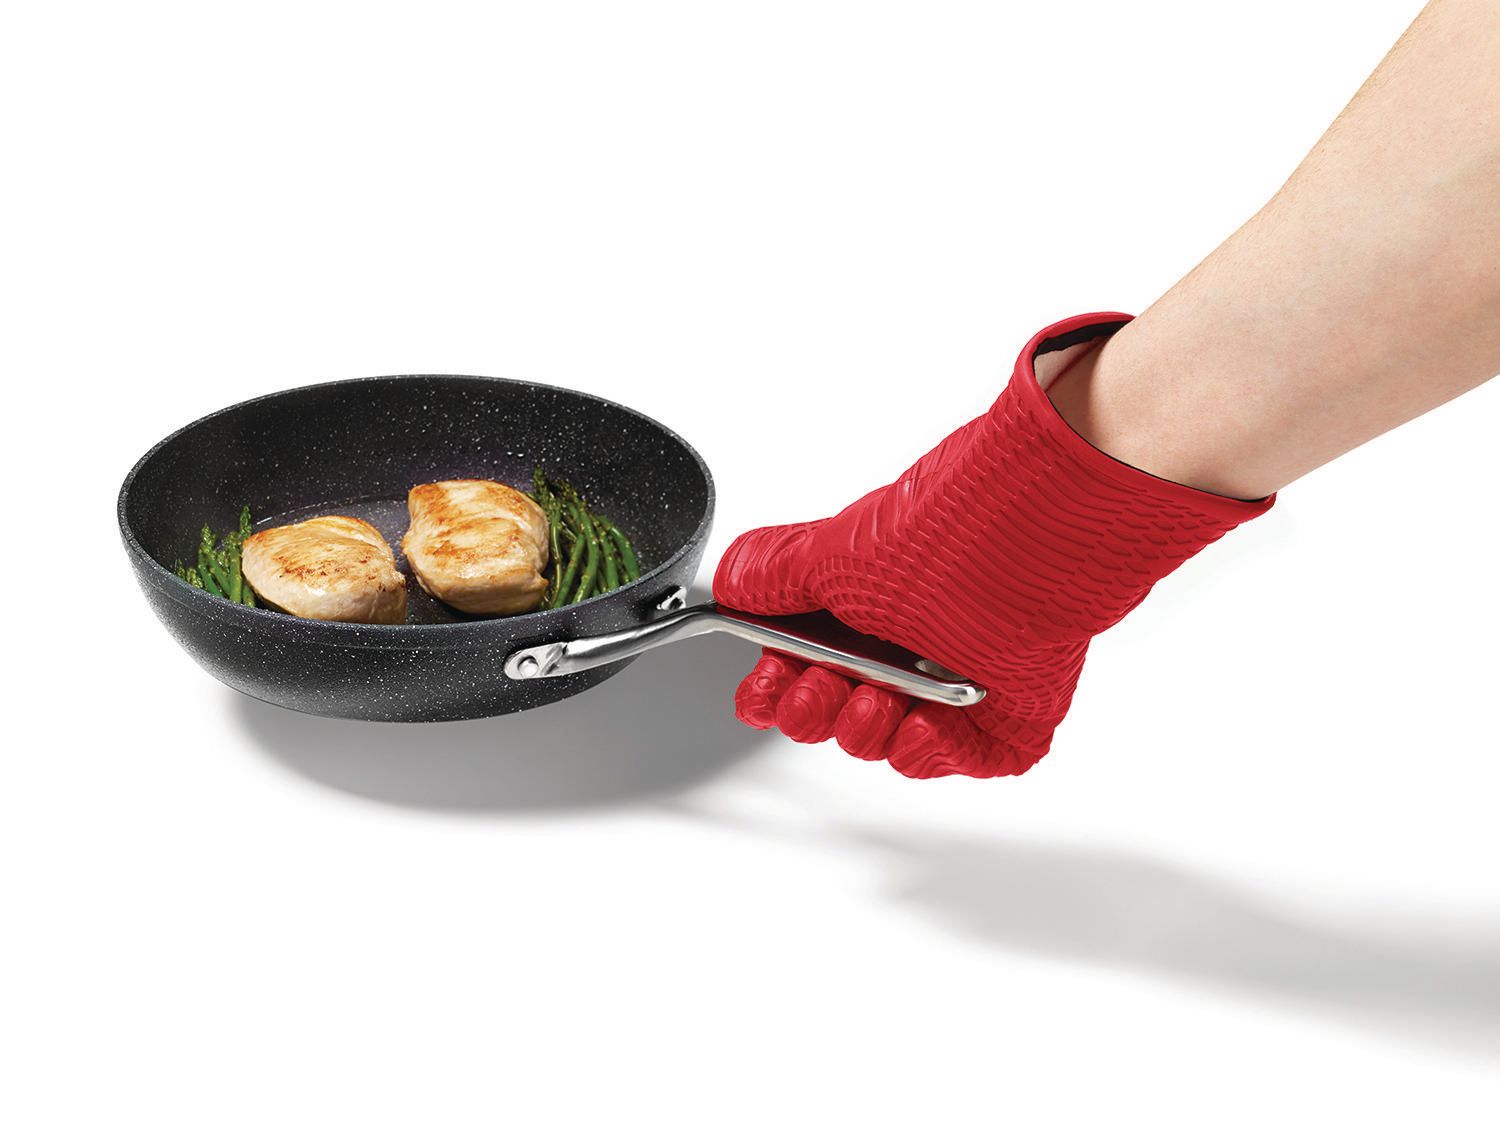 Starfrit 15 Silicone Oven Glove with Cotton Liner - 9771917